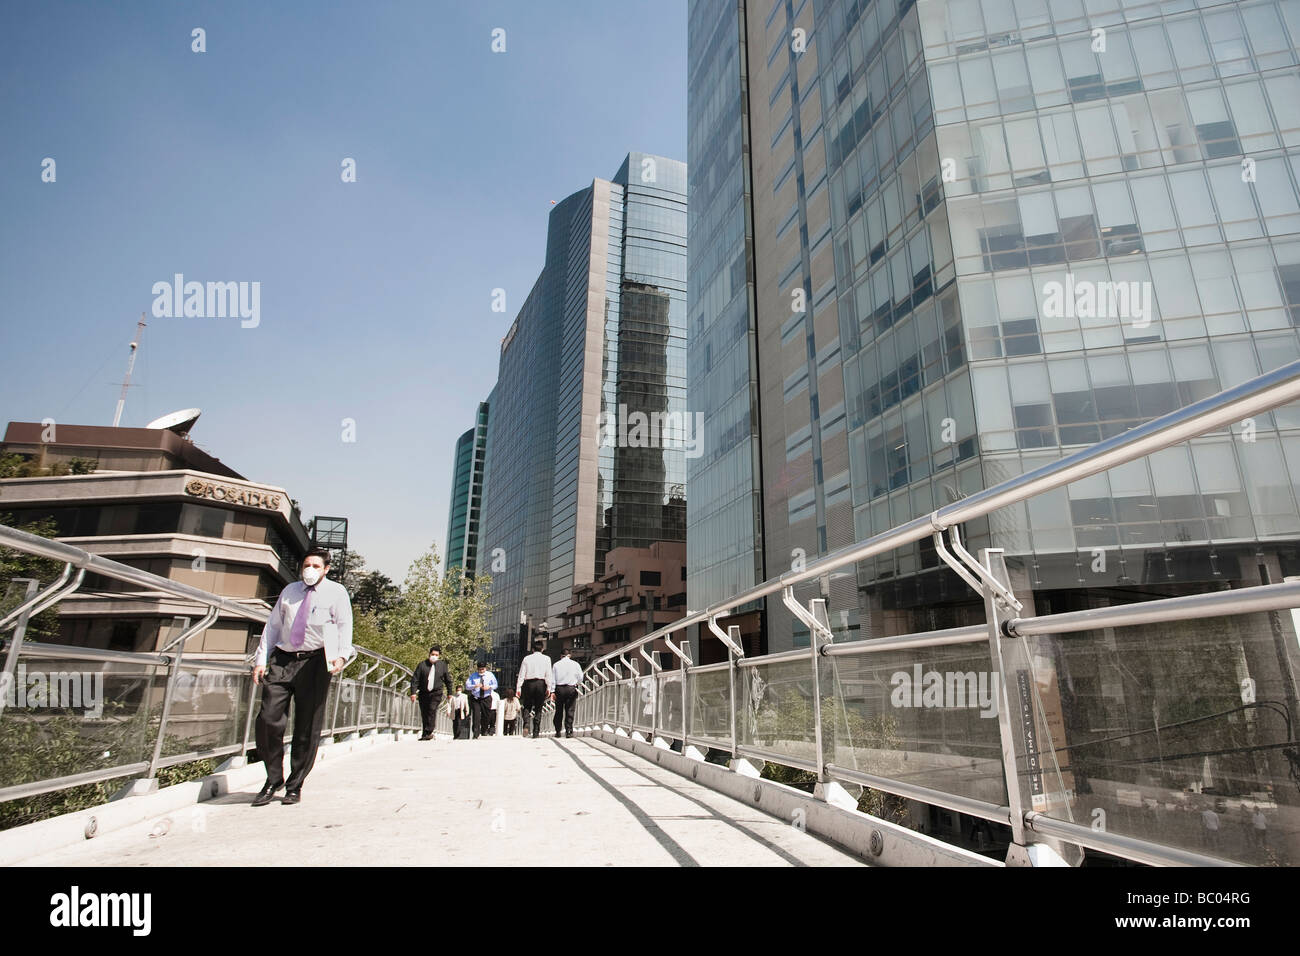 People walk through a pedestrian bridge  wearing mask during the swine flu epidemic in Mexico City, DF, Mexico. Stock Photo